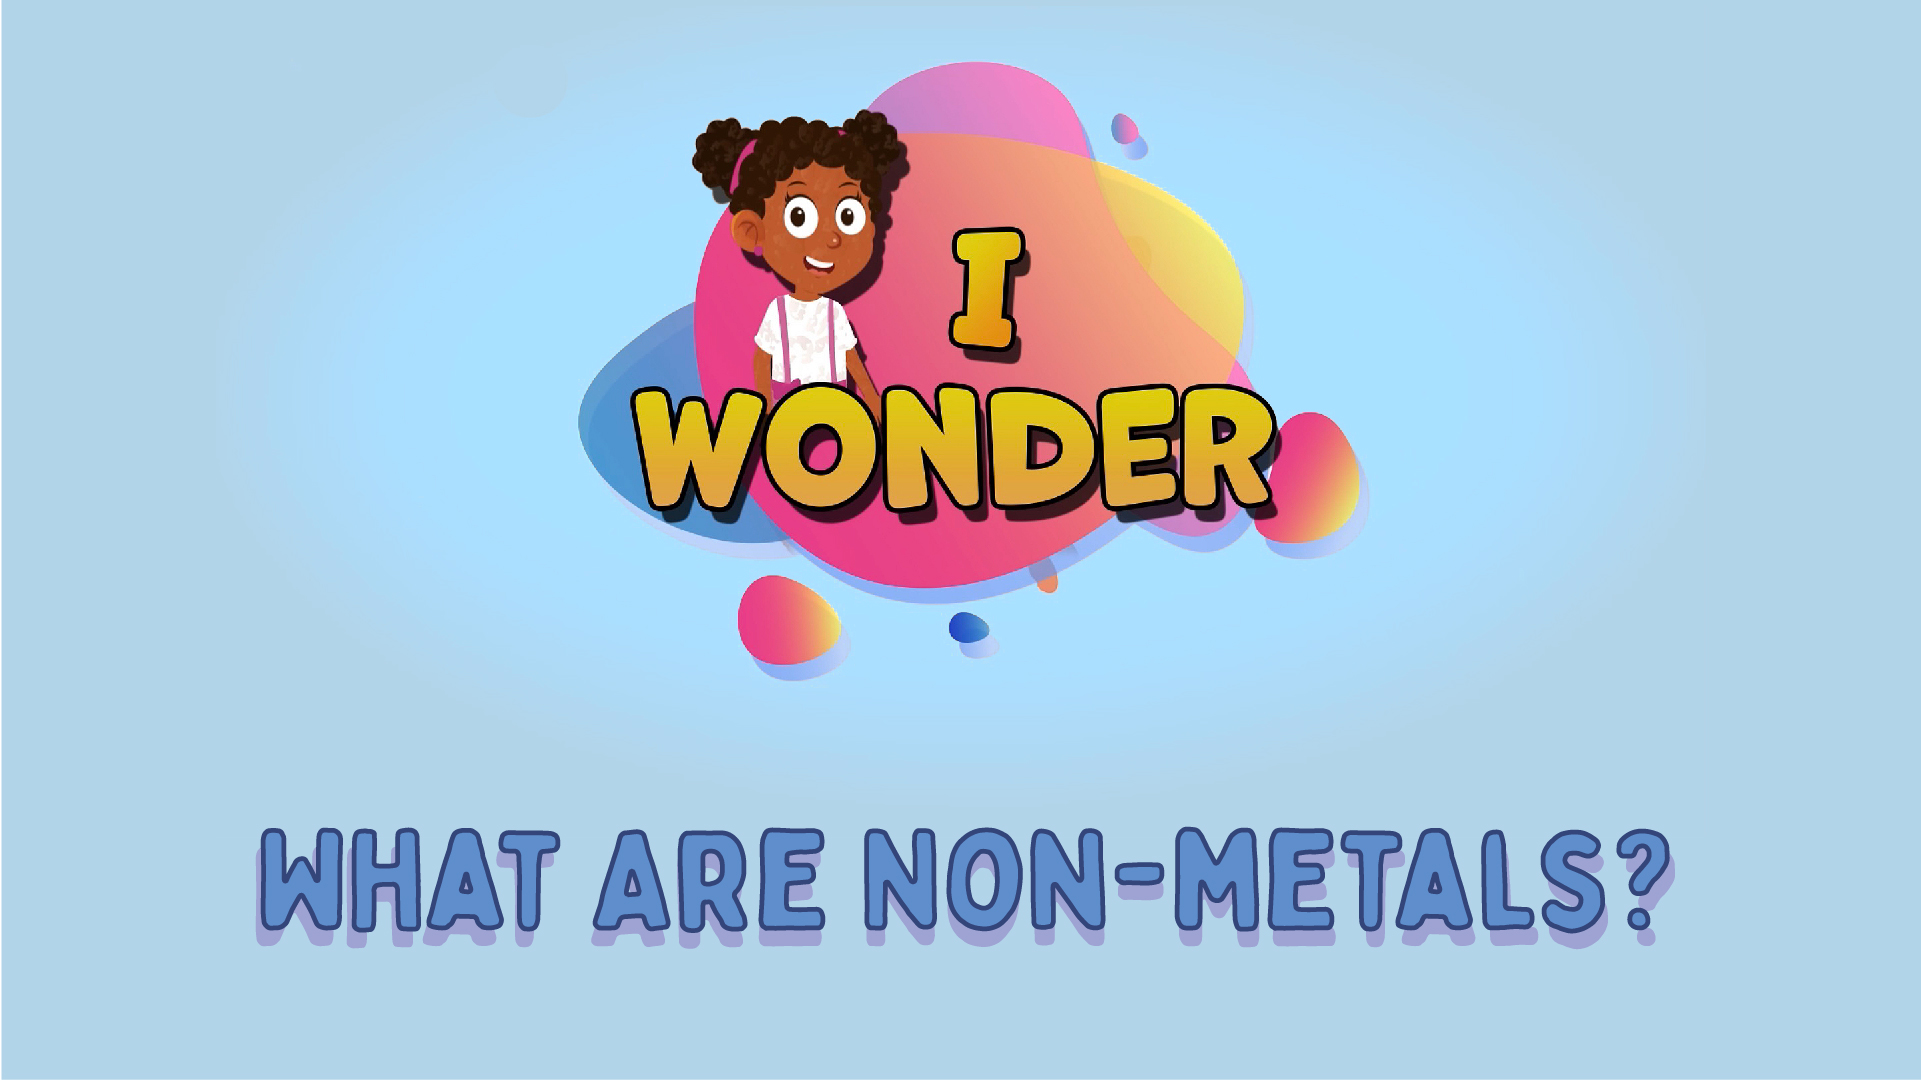 What Are Non-metals?